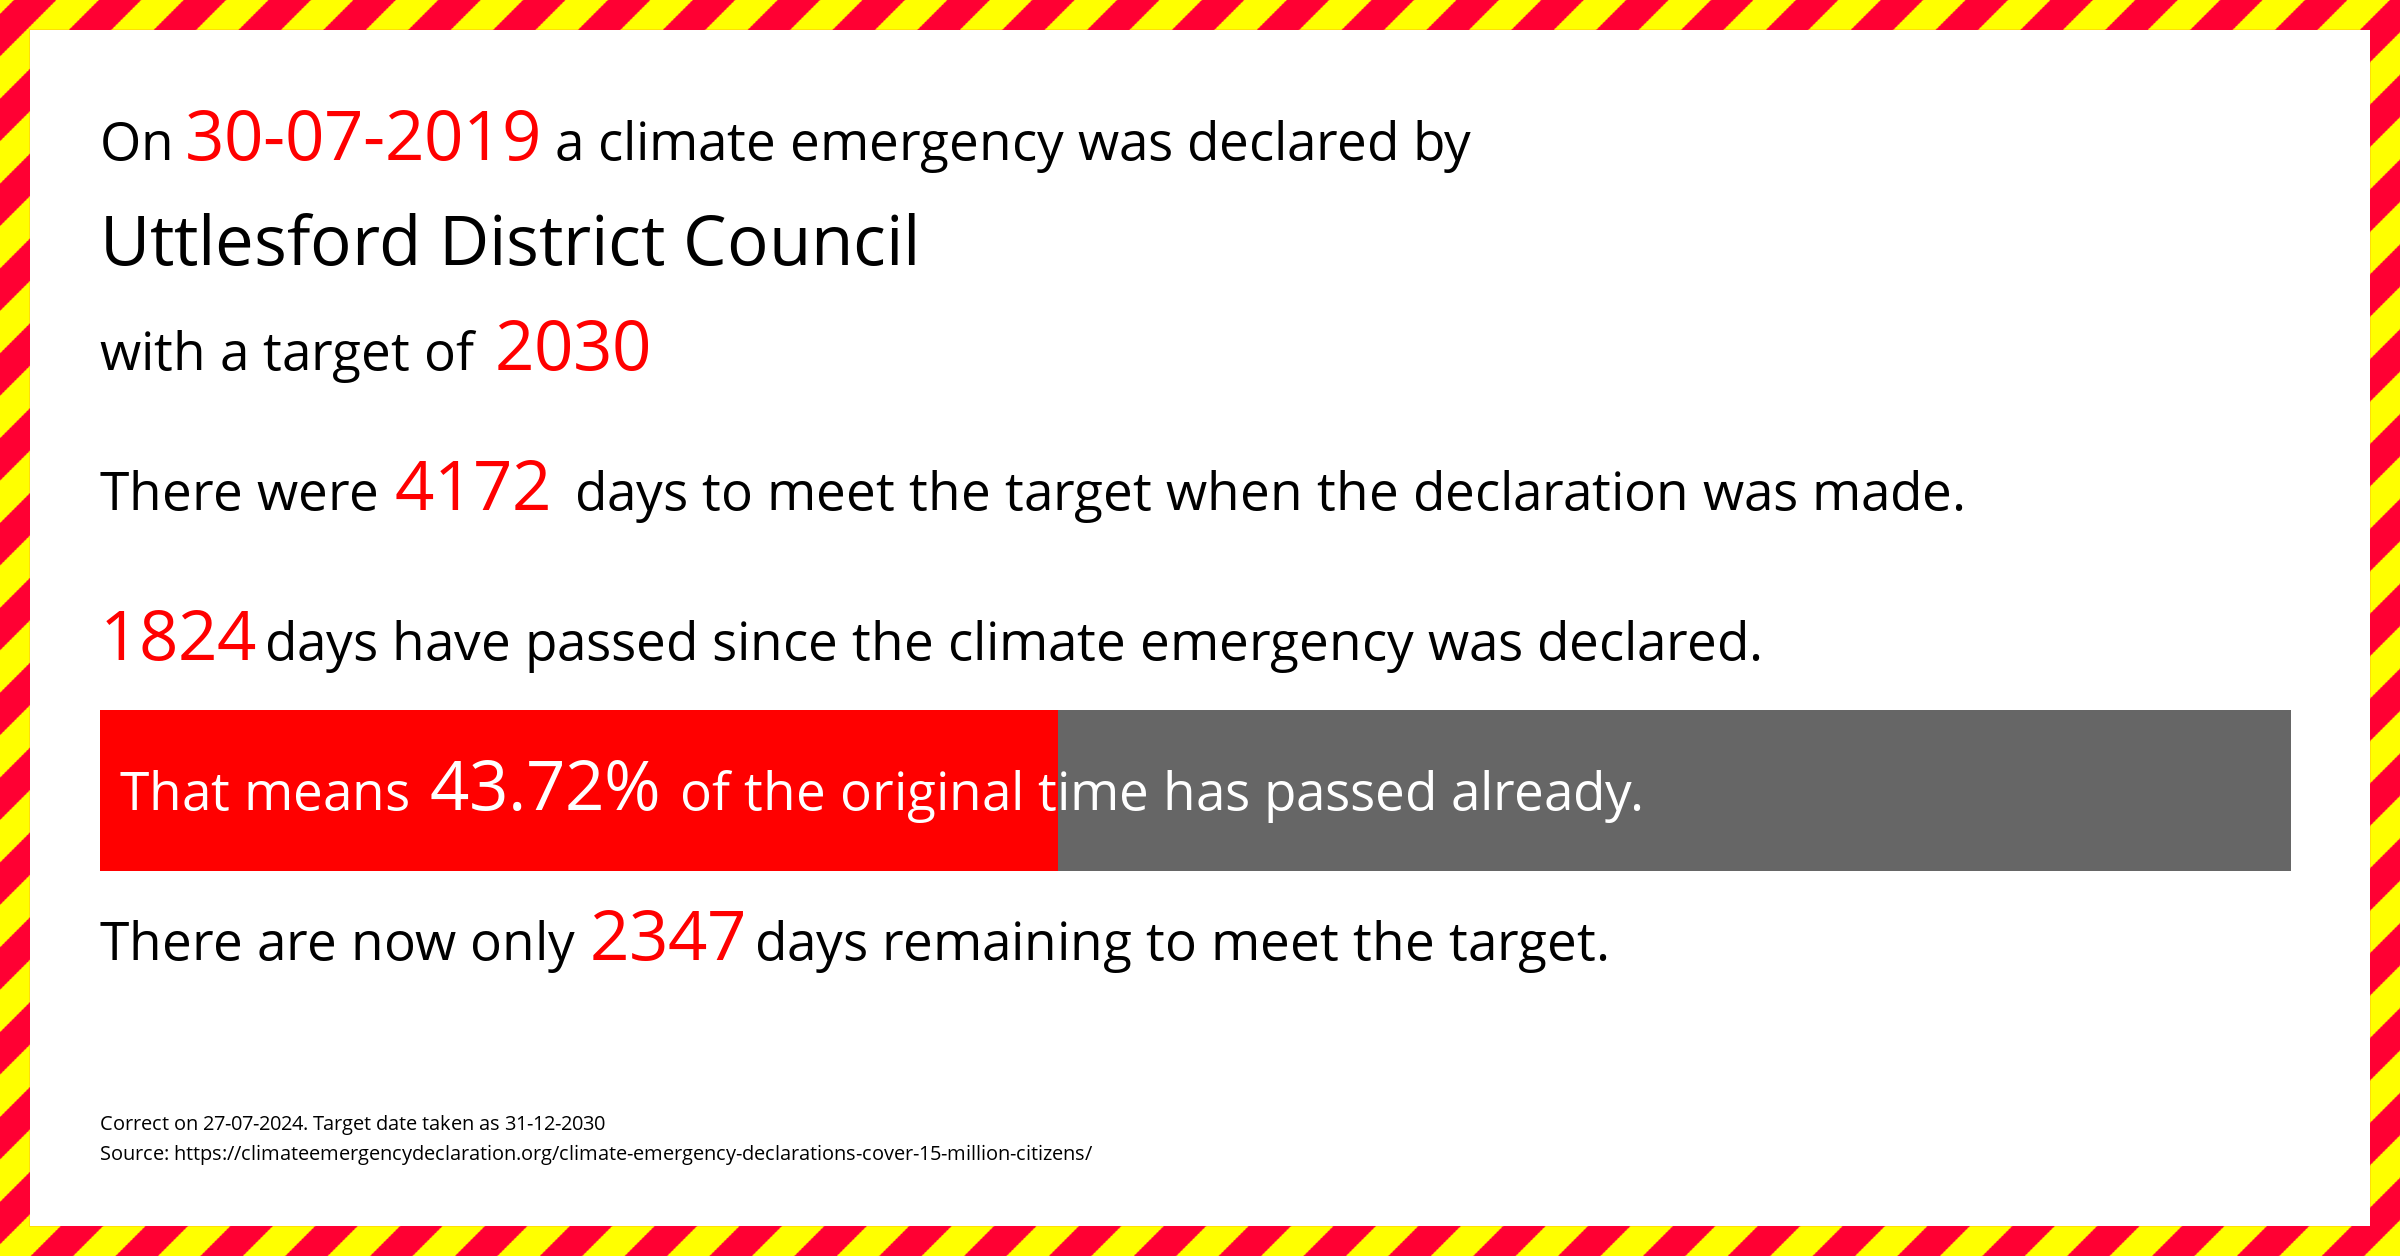 Uttlesford District Council declared a Climate emergency on Tuesday 30th July 2019, with a target of 2030.